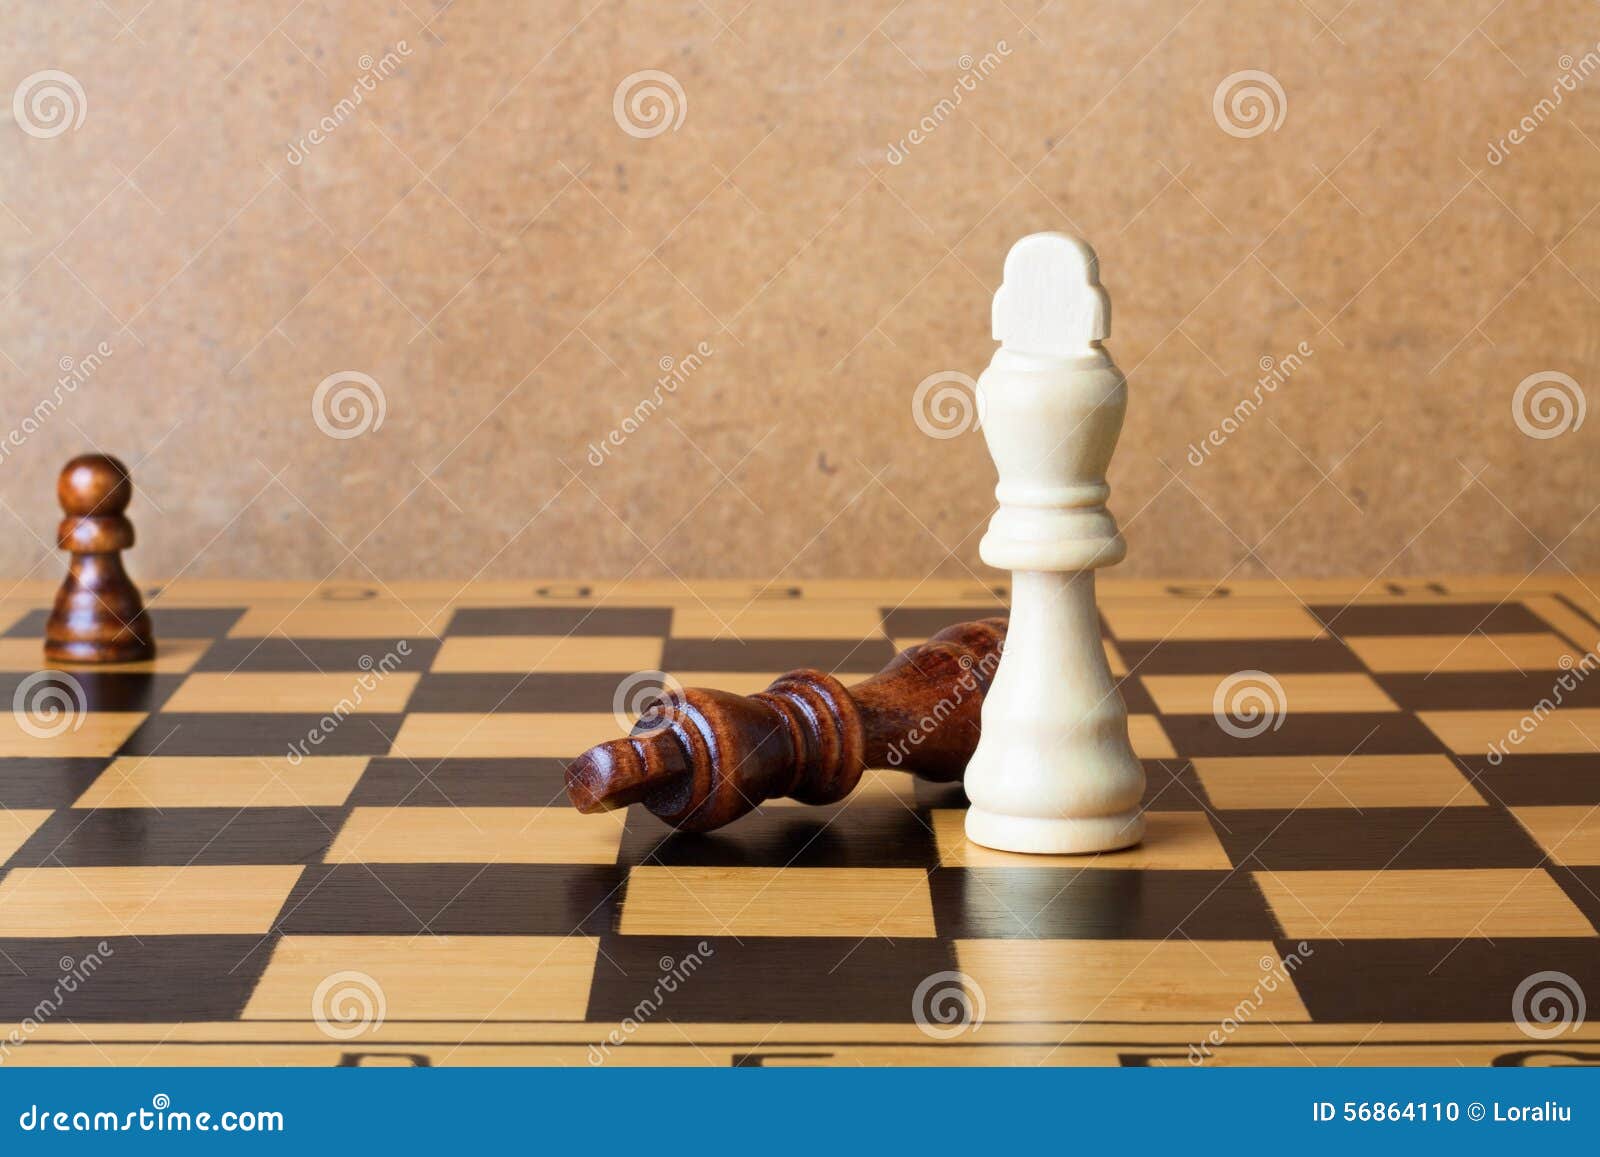 108 Chess Quote Stock Photos - Free & Royalty-Free Stock Photos from  Dreamstime